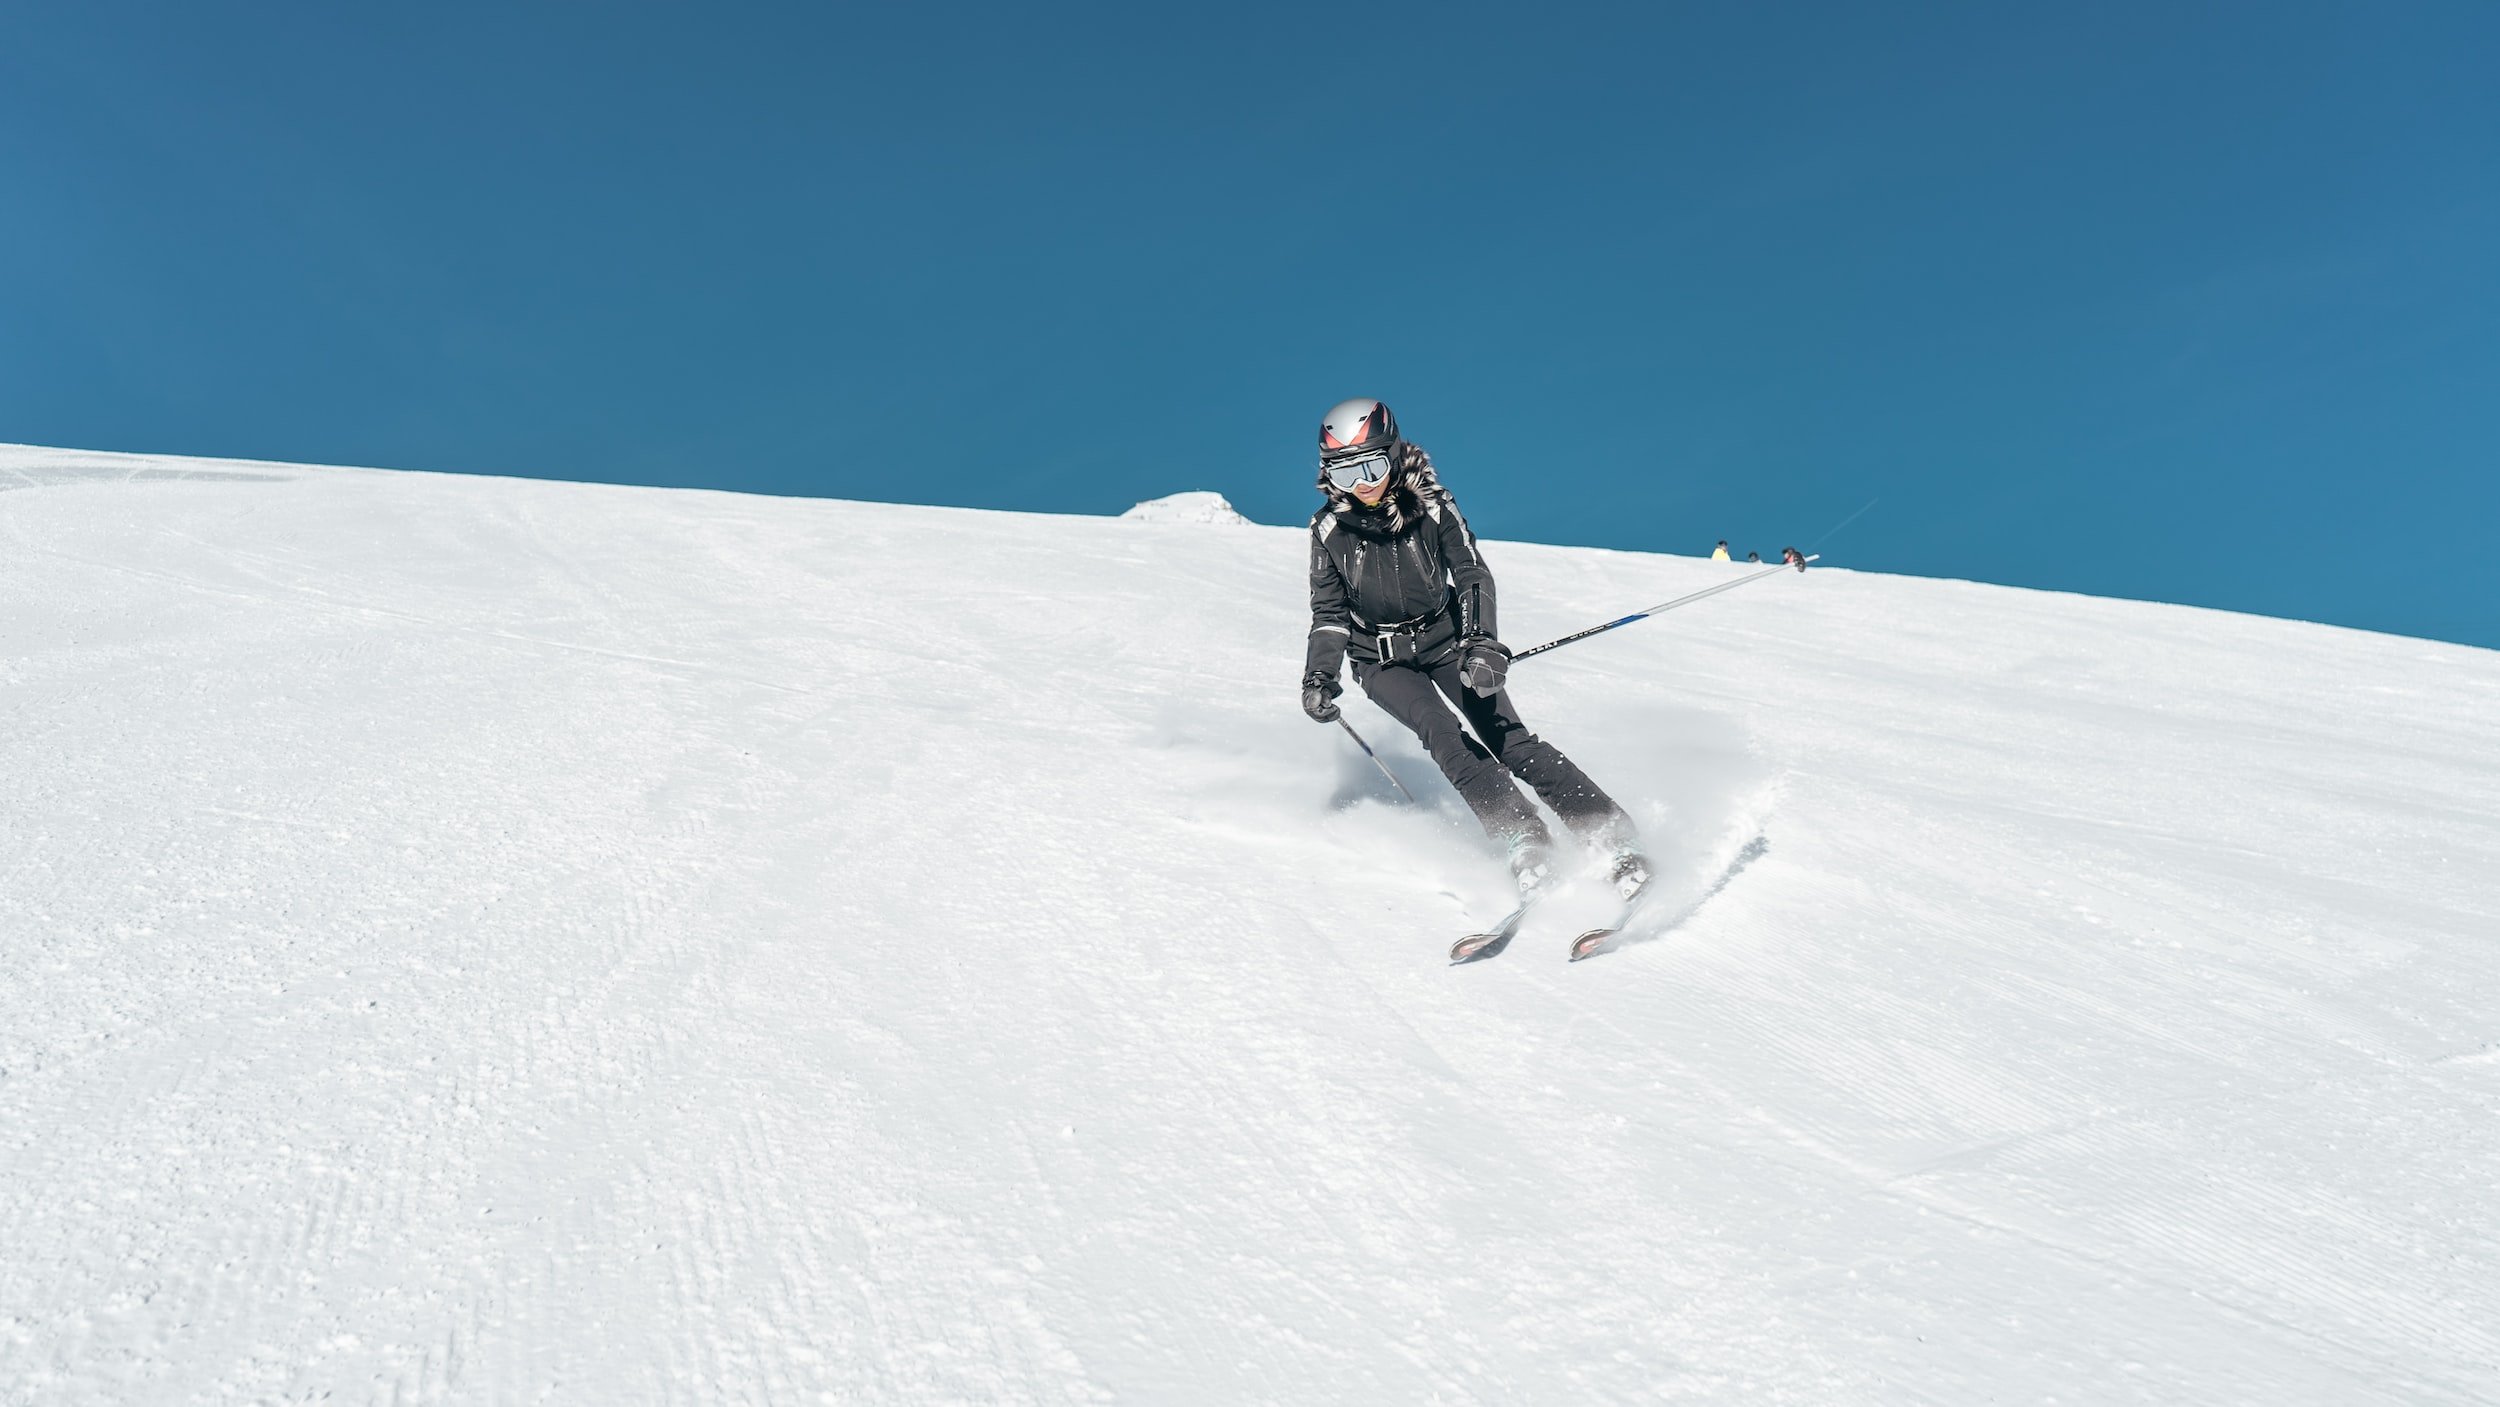 Discover the ski slopes of the sAlps for sporting activities